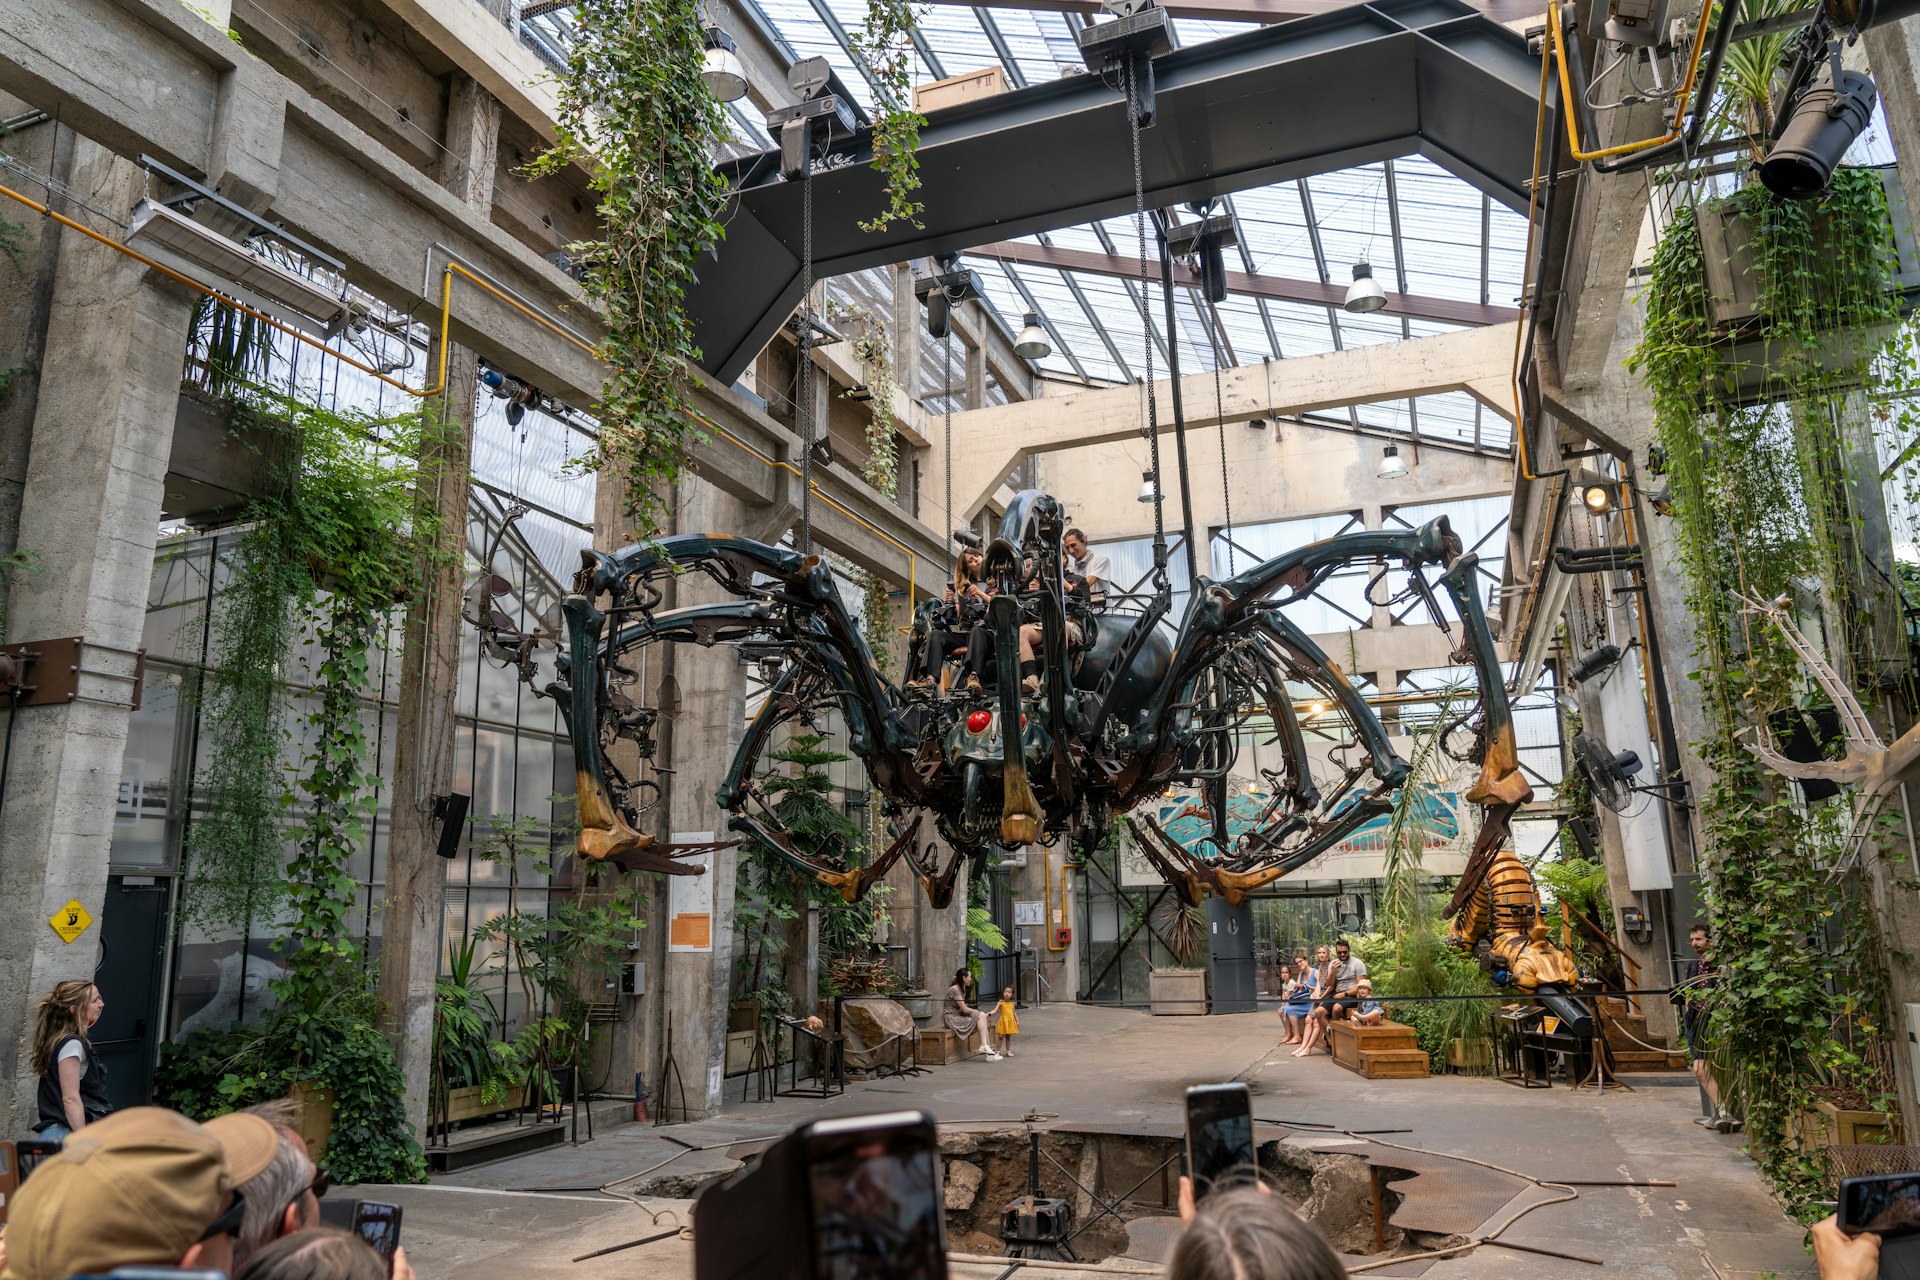 Giant spider in the steampunk style Machine Gallery of the Machines of the Isle of Nantes is house